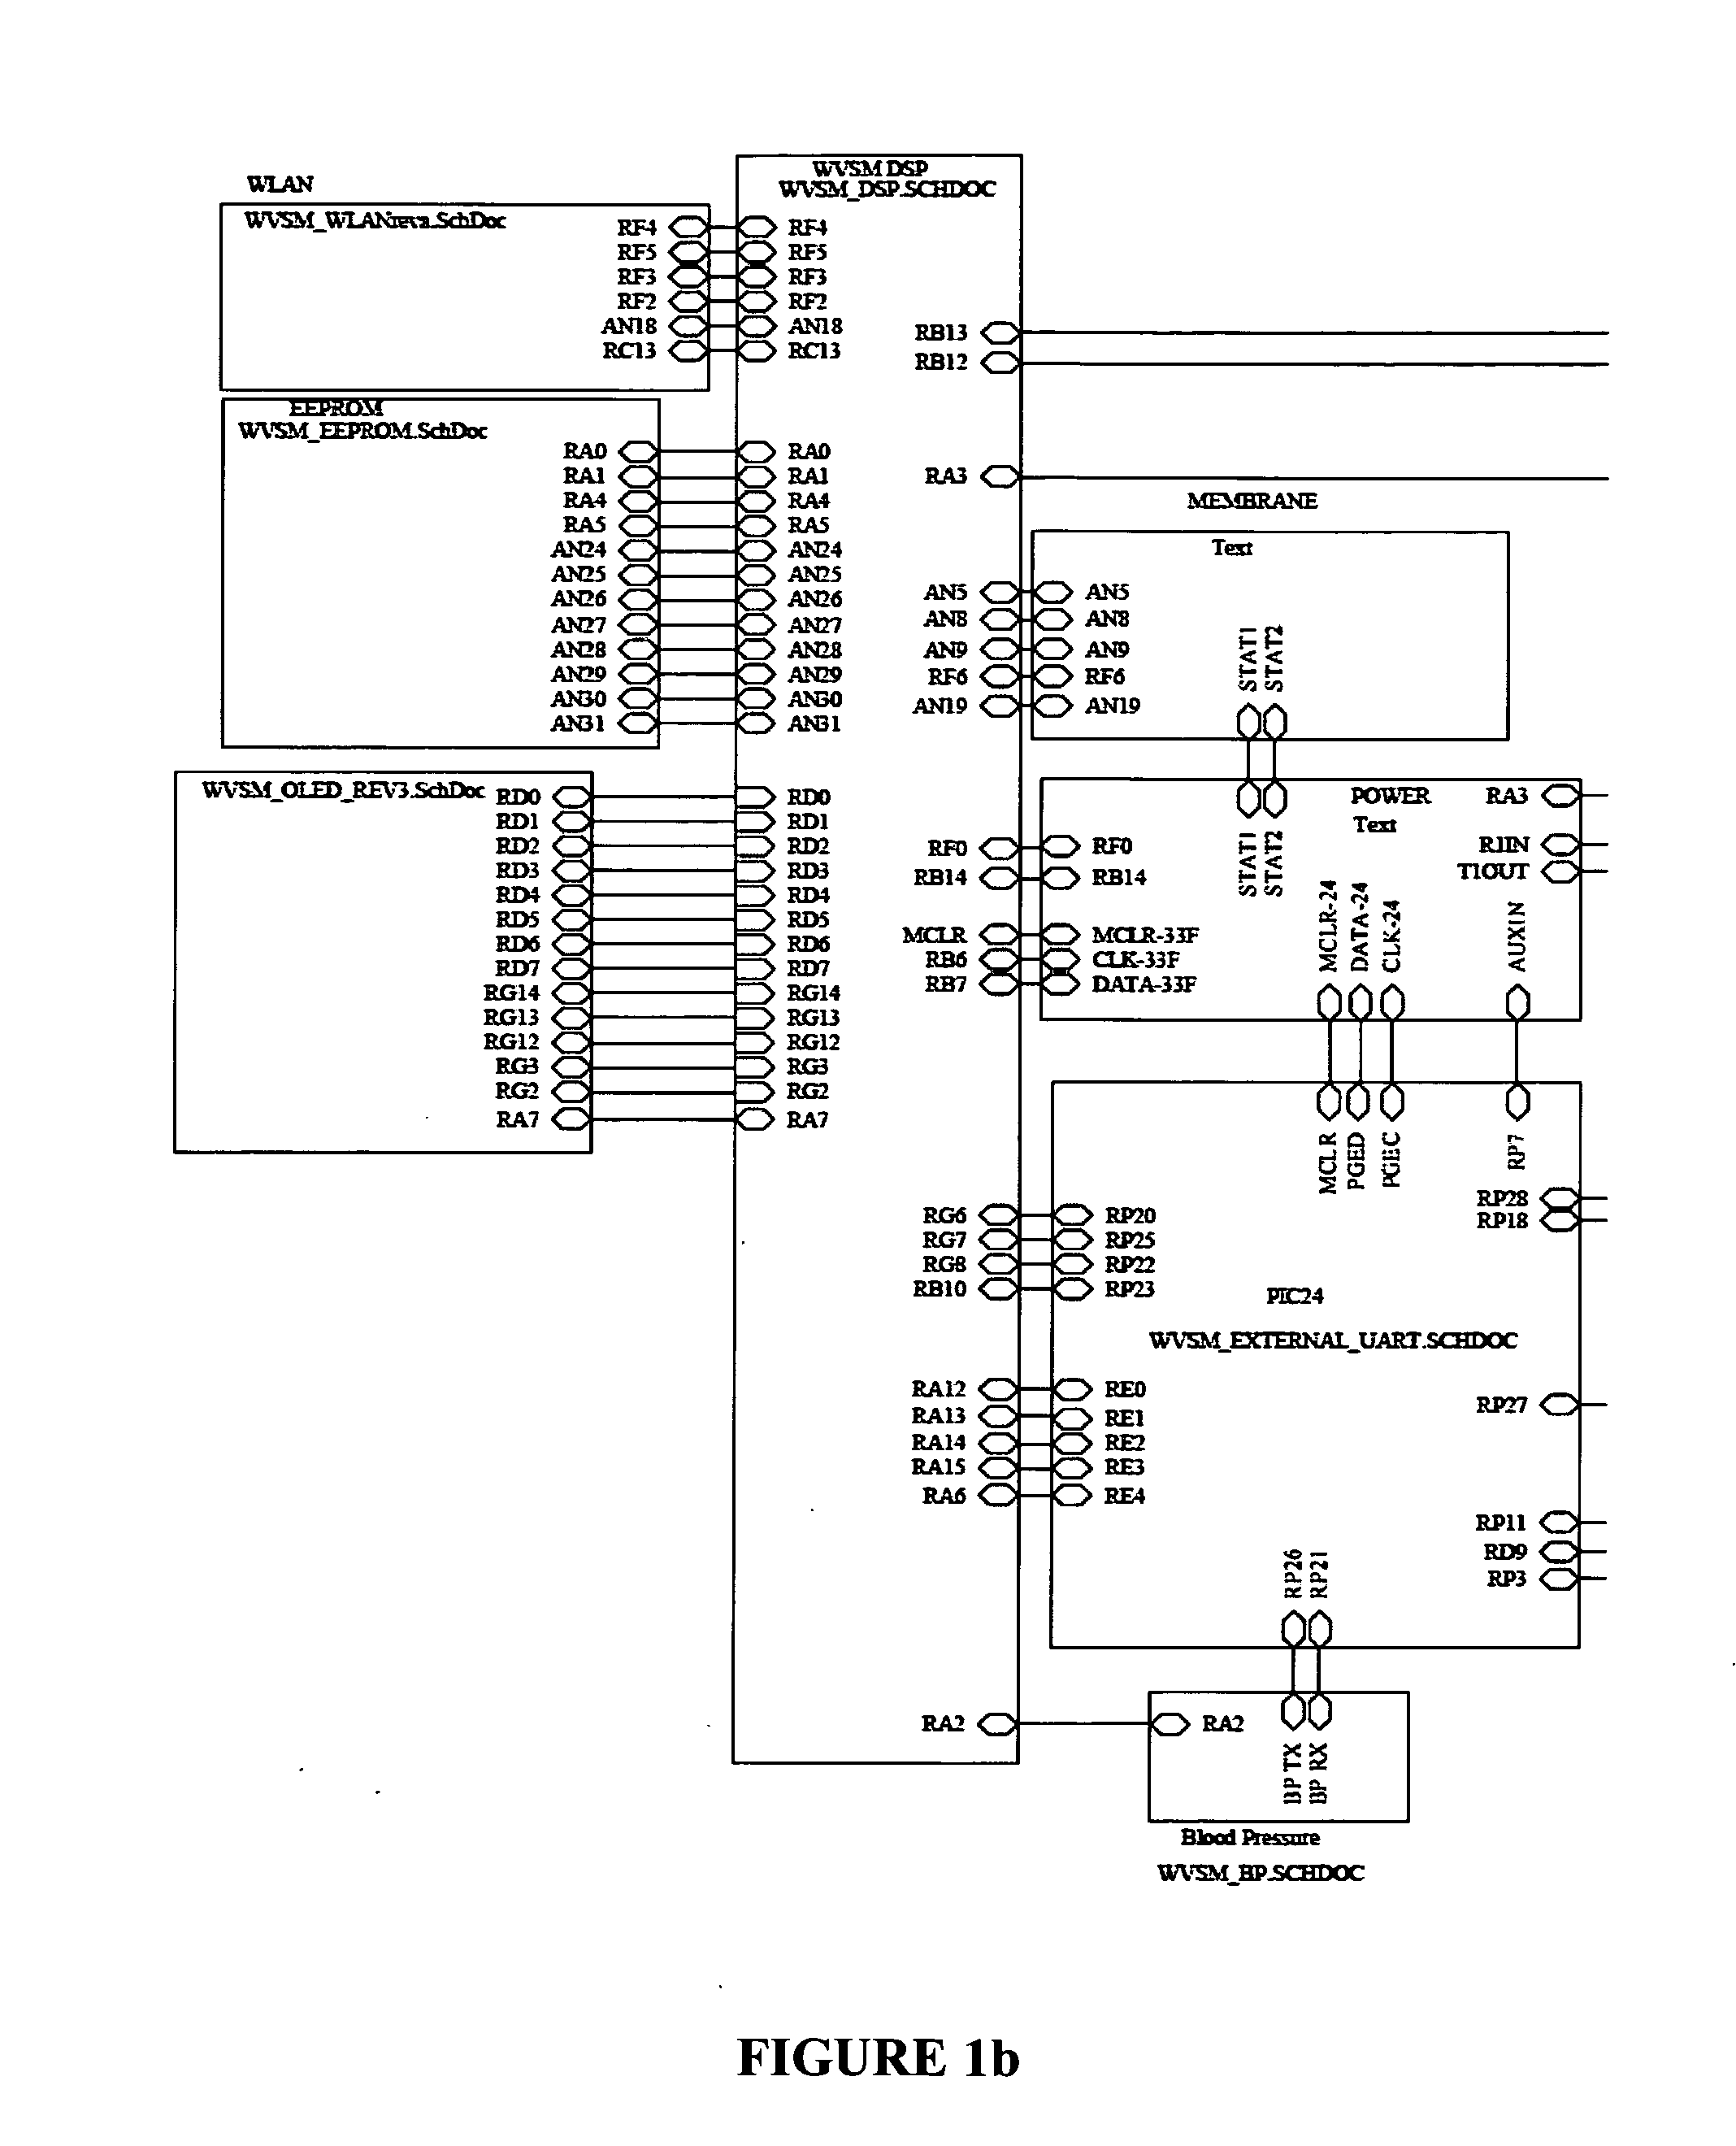 Device and system for wireless monitoring of the vital signs of patients